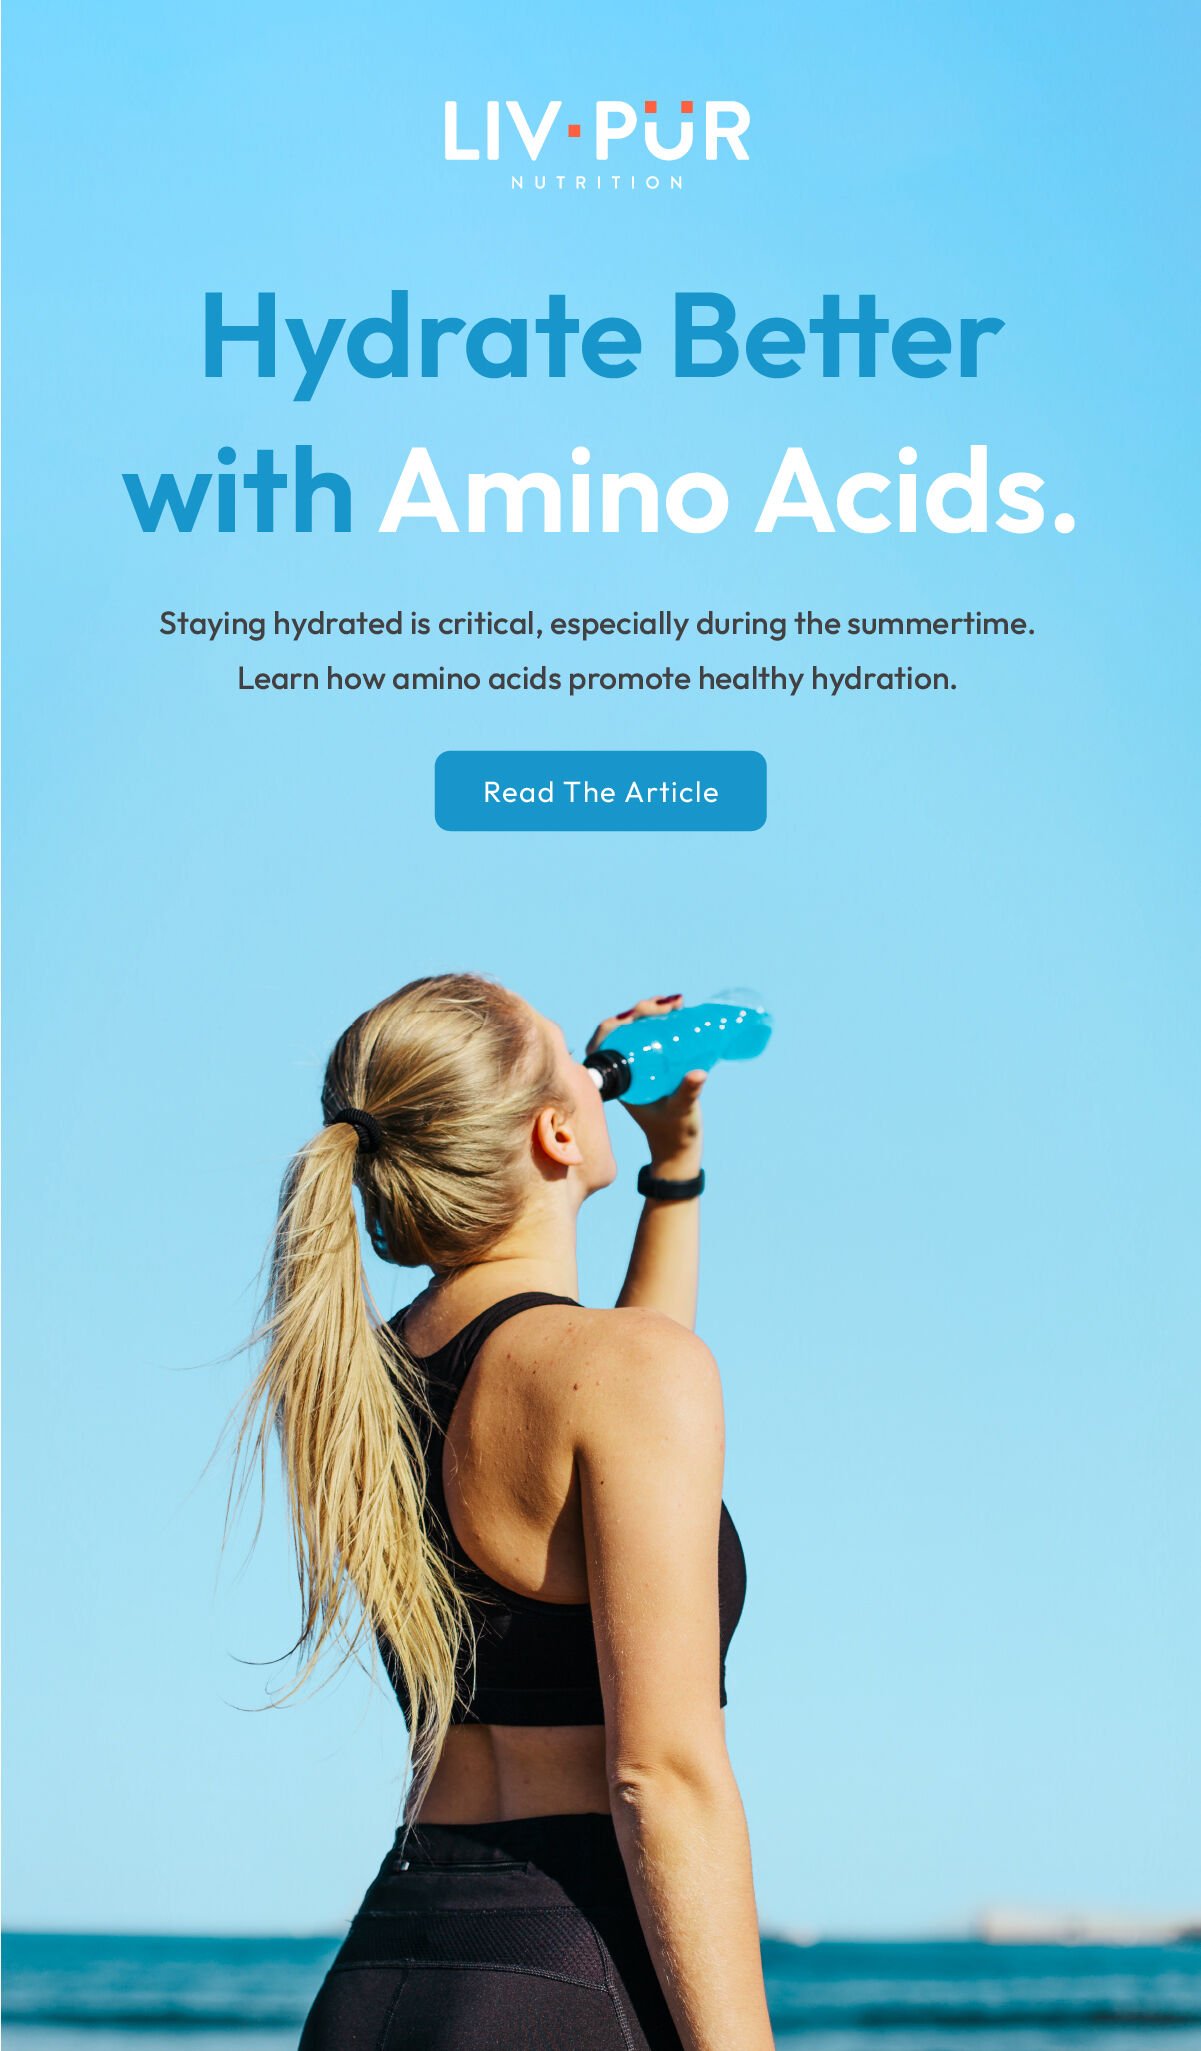 Hydrate Better with Amino Acids